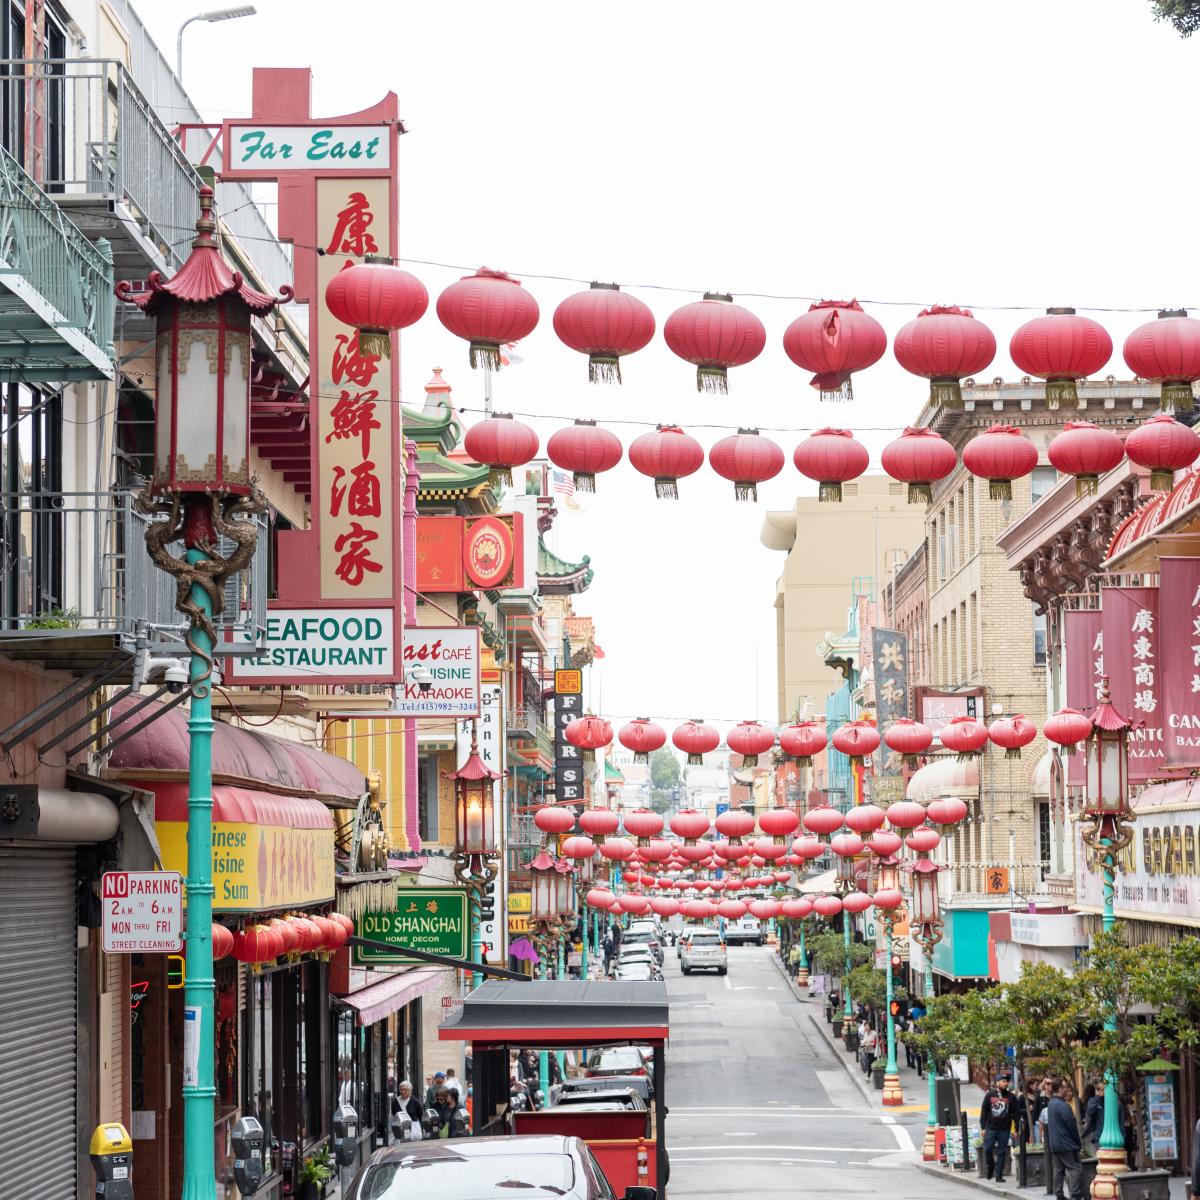 Image of Grant Avenue in Chinatown with red lanterns strung across the street from building face to building face.